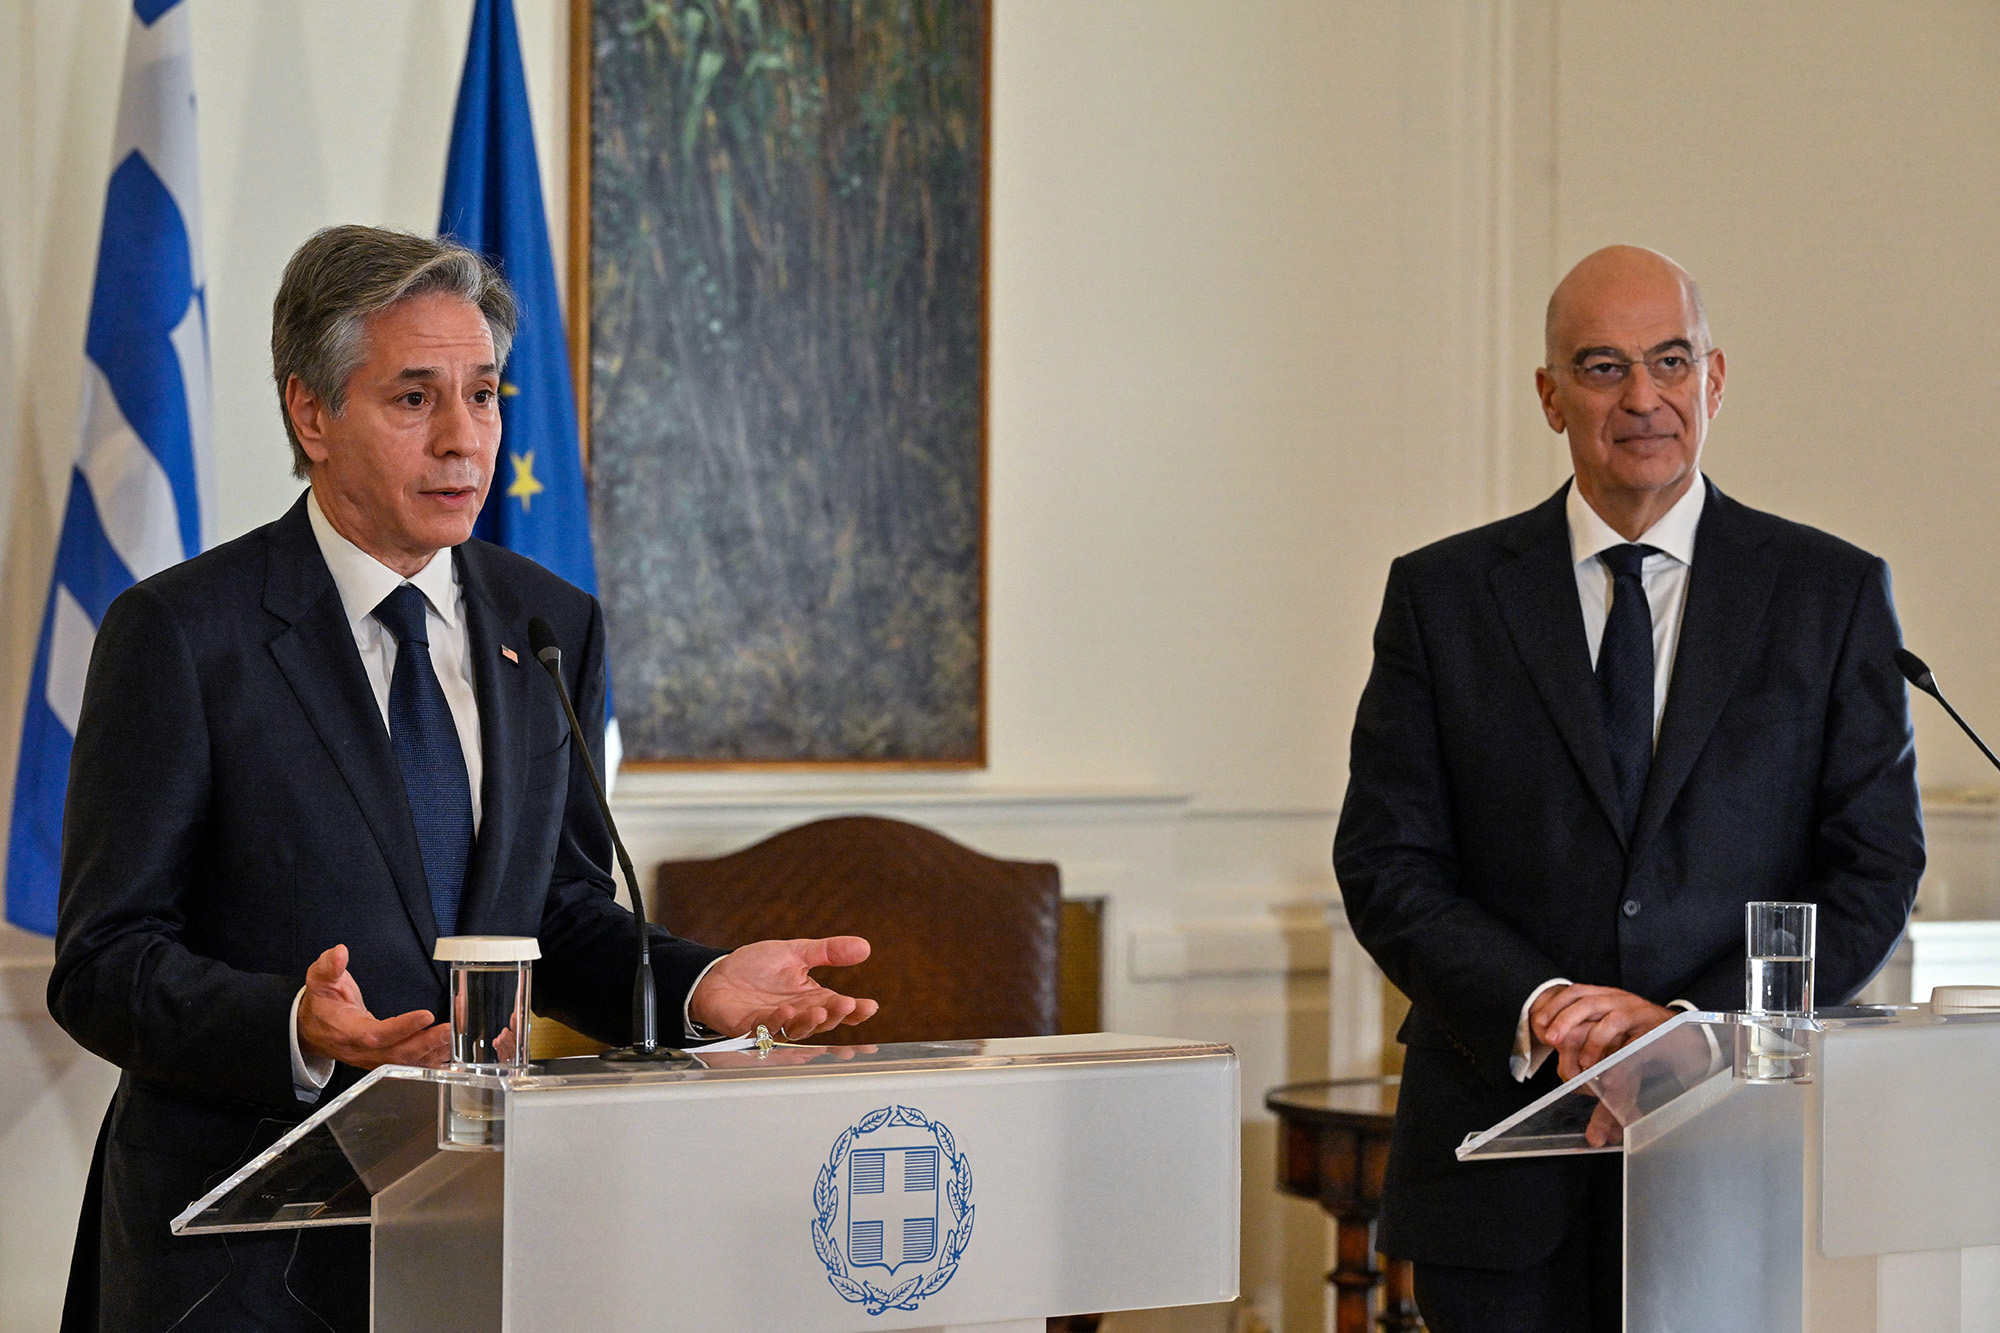 US Secretary of State Antony Blinken, left, speaks during a news conference with Greek Foreign Affairs Minister Nikos Dendias, in Athens, Greece, on February 21.